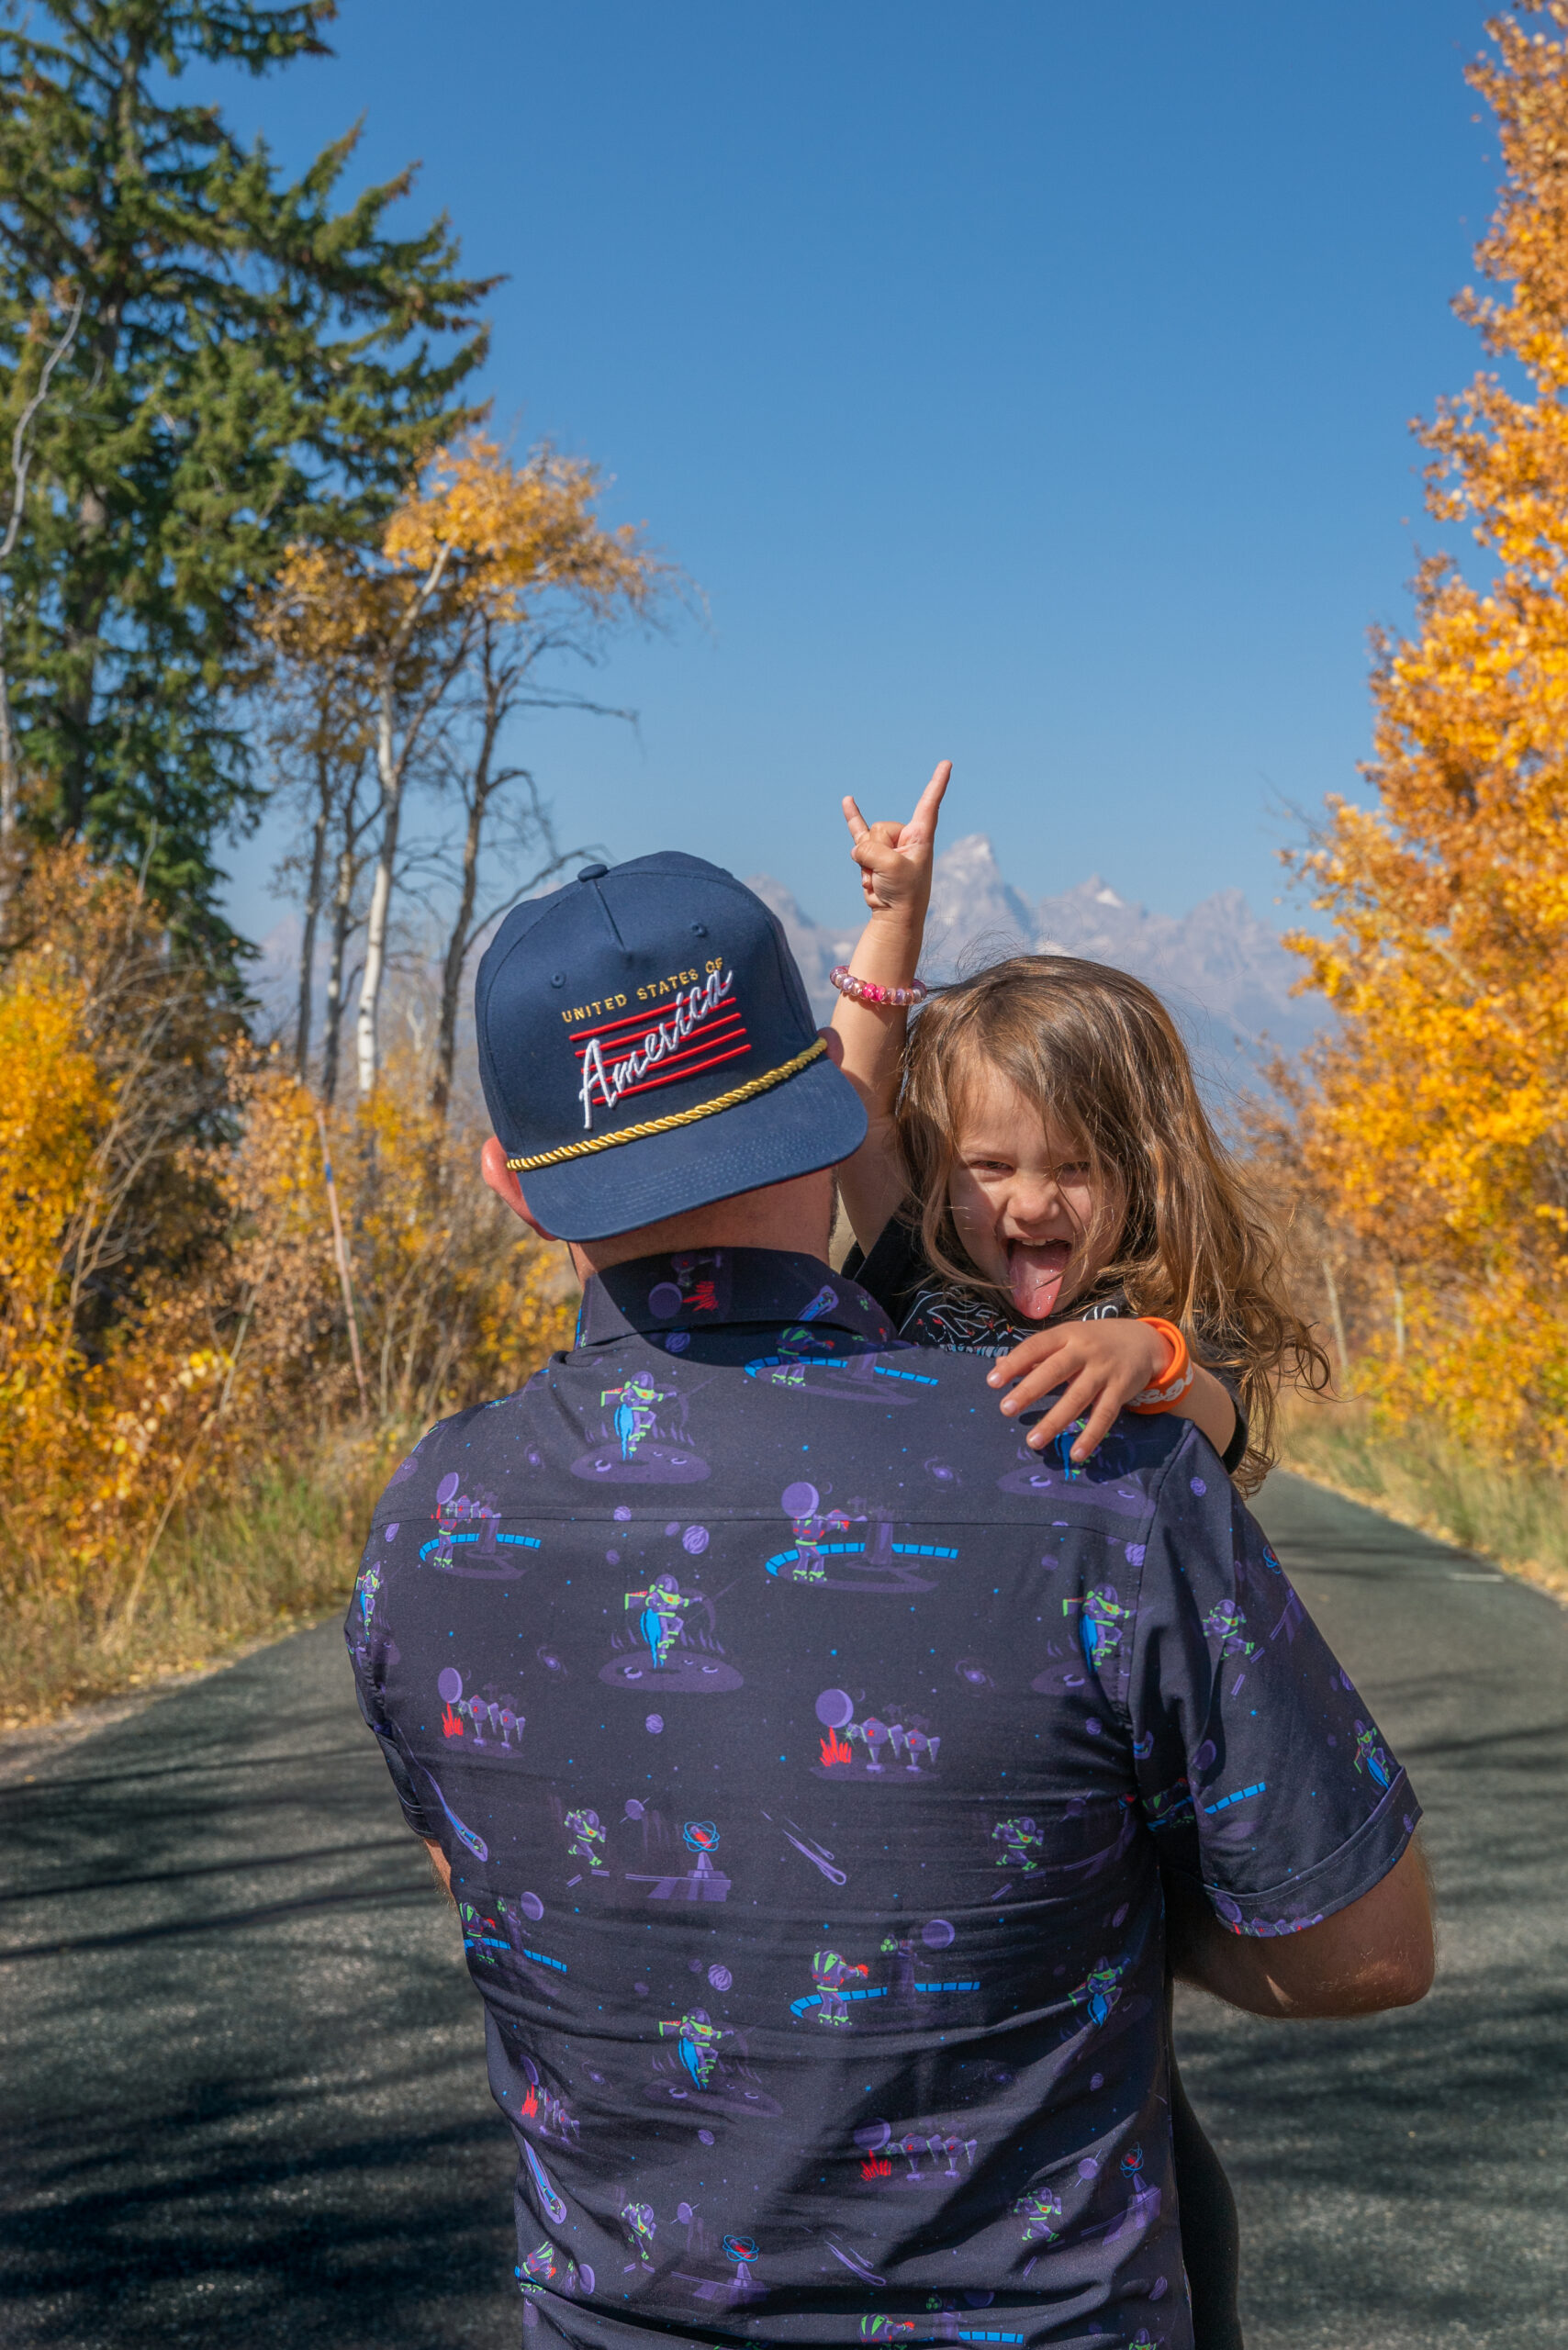 Child holds up a rock and roll sign with tongue out over father's shoulder as he walks through fall in Grand Tetons National Park